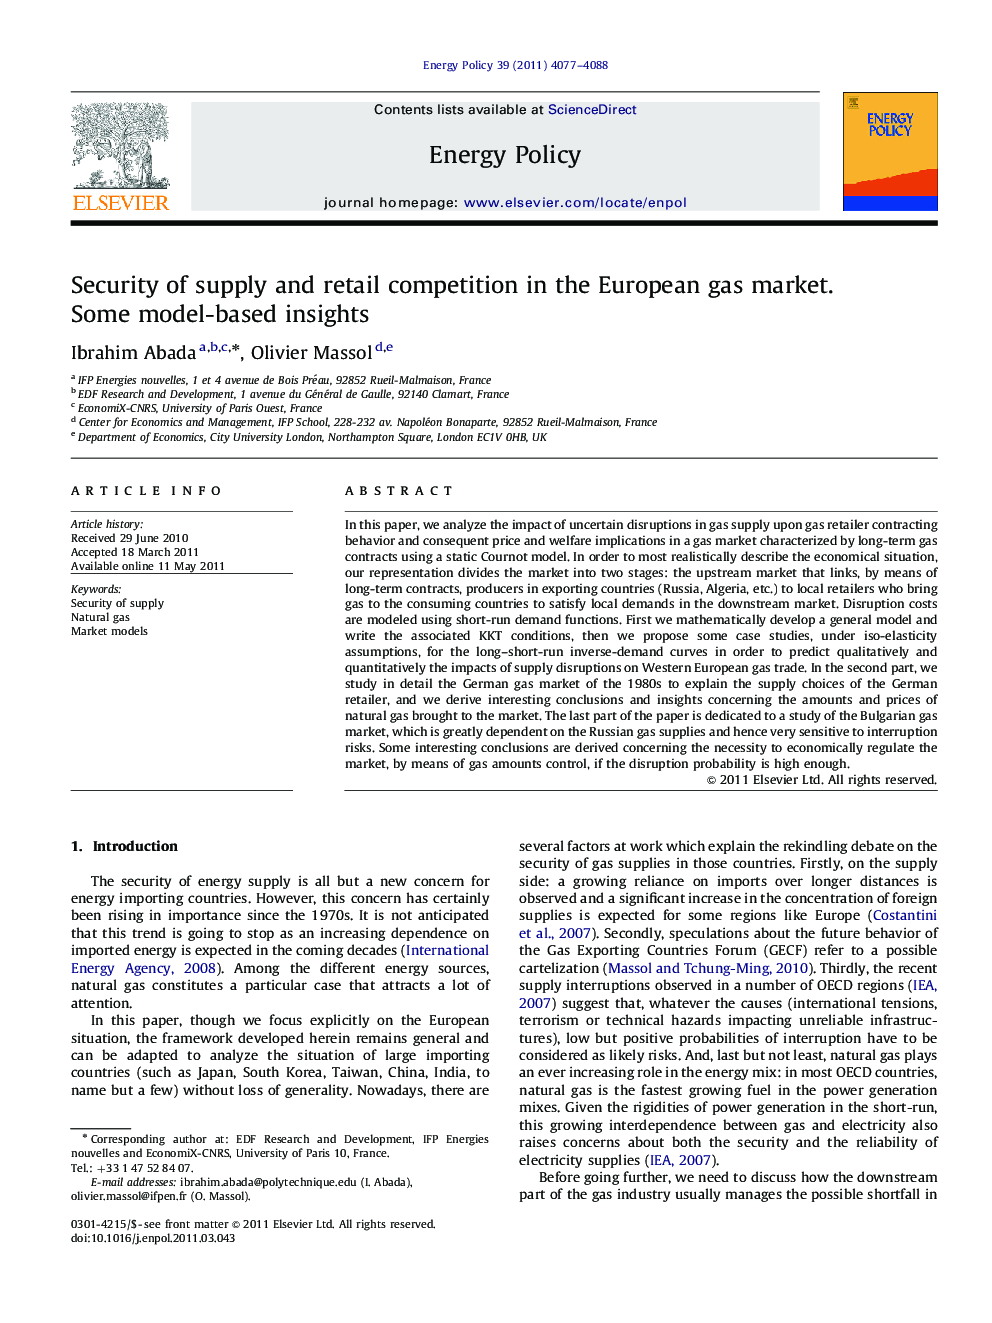 Security of supply and retail competition in the European gas market.: Some model-based insights